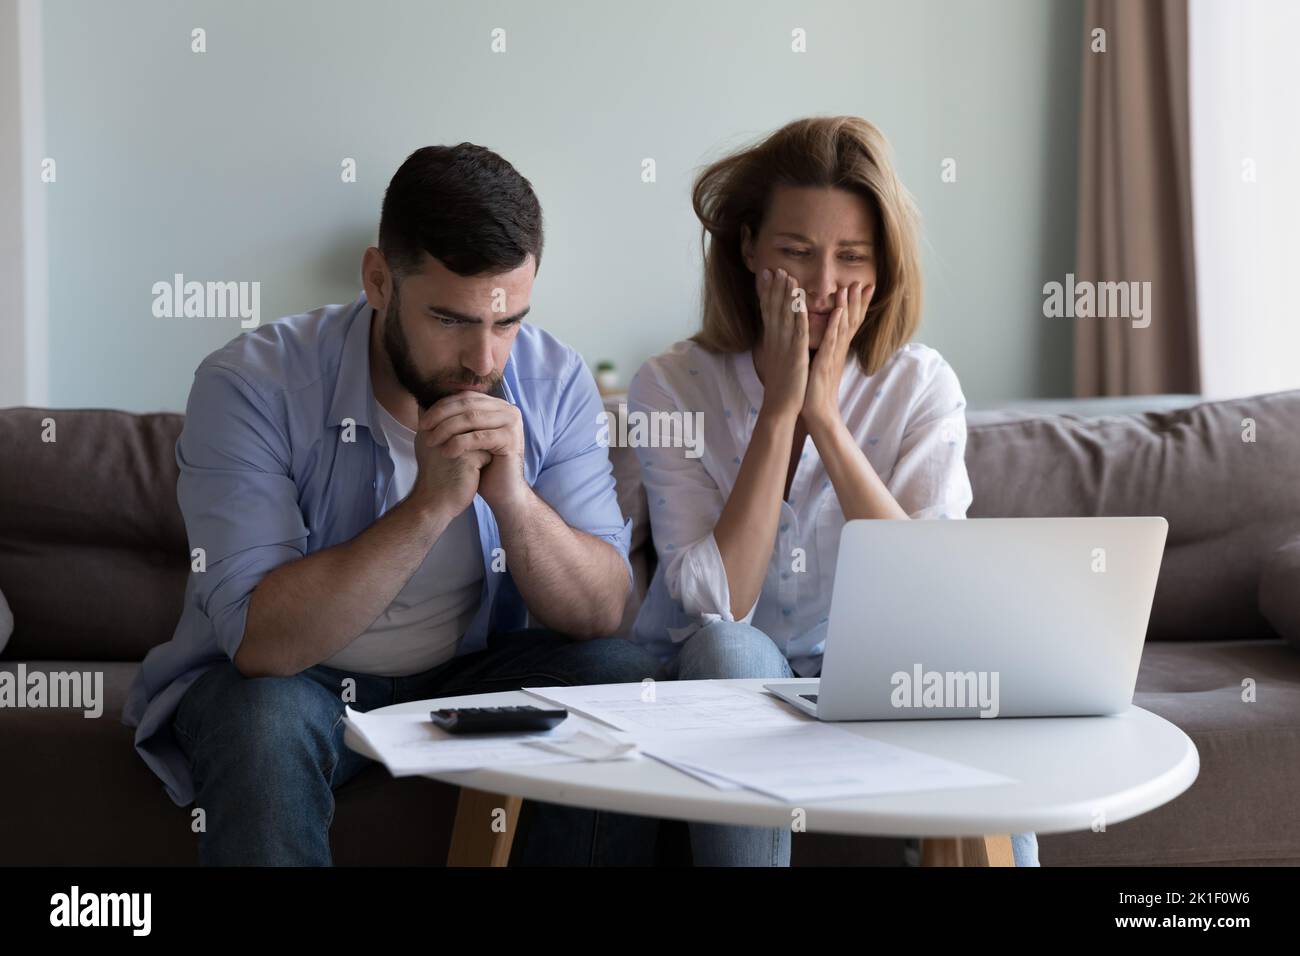 Frustrated worried millennial husband and wife reading bankrupt message Stock Photo